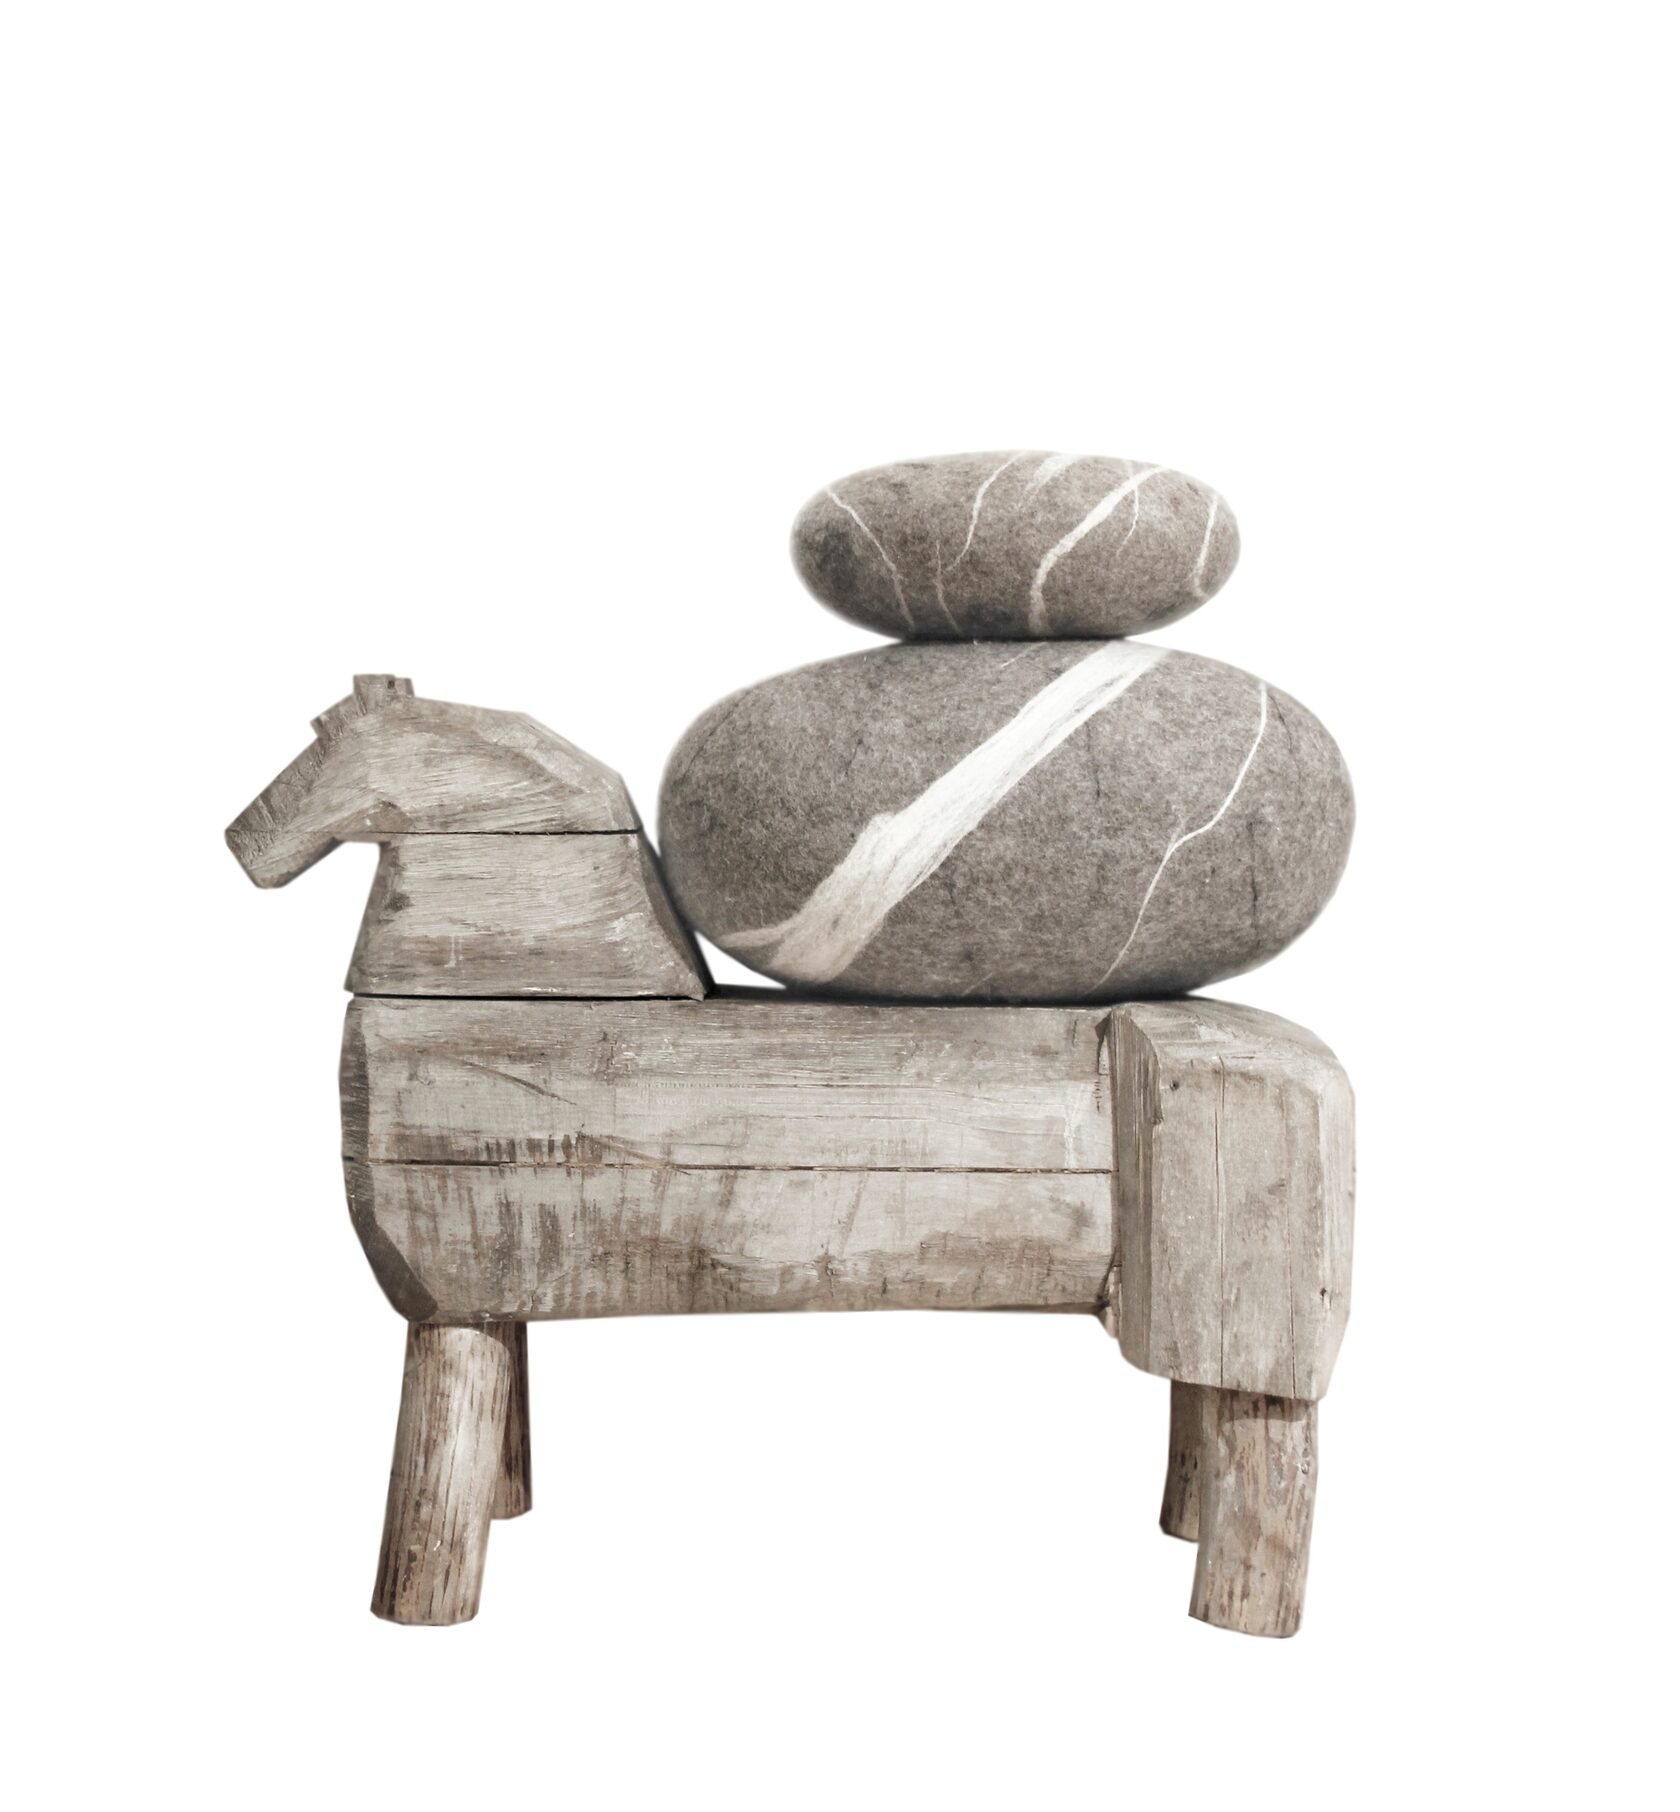 KATSU felted woolen stone cushions lying on a Scandinavian style wooden bench in a form of a horse